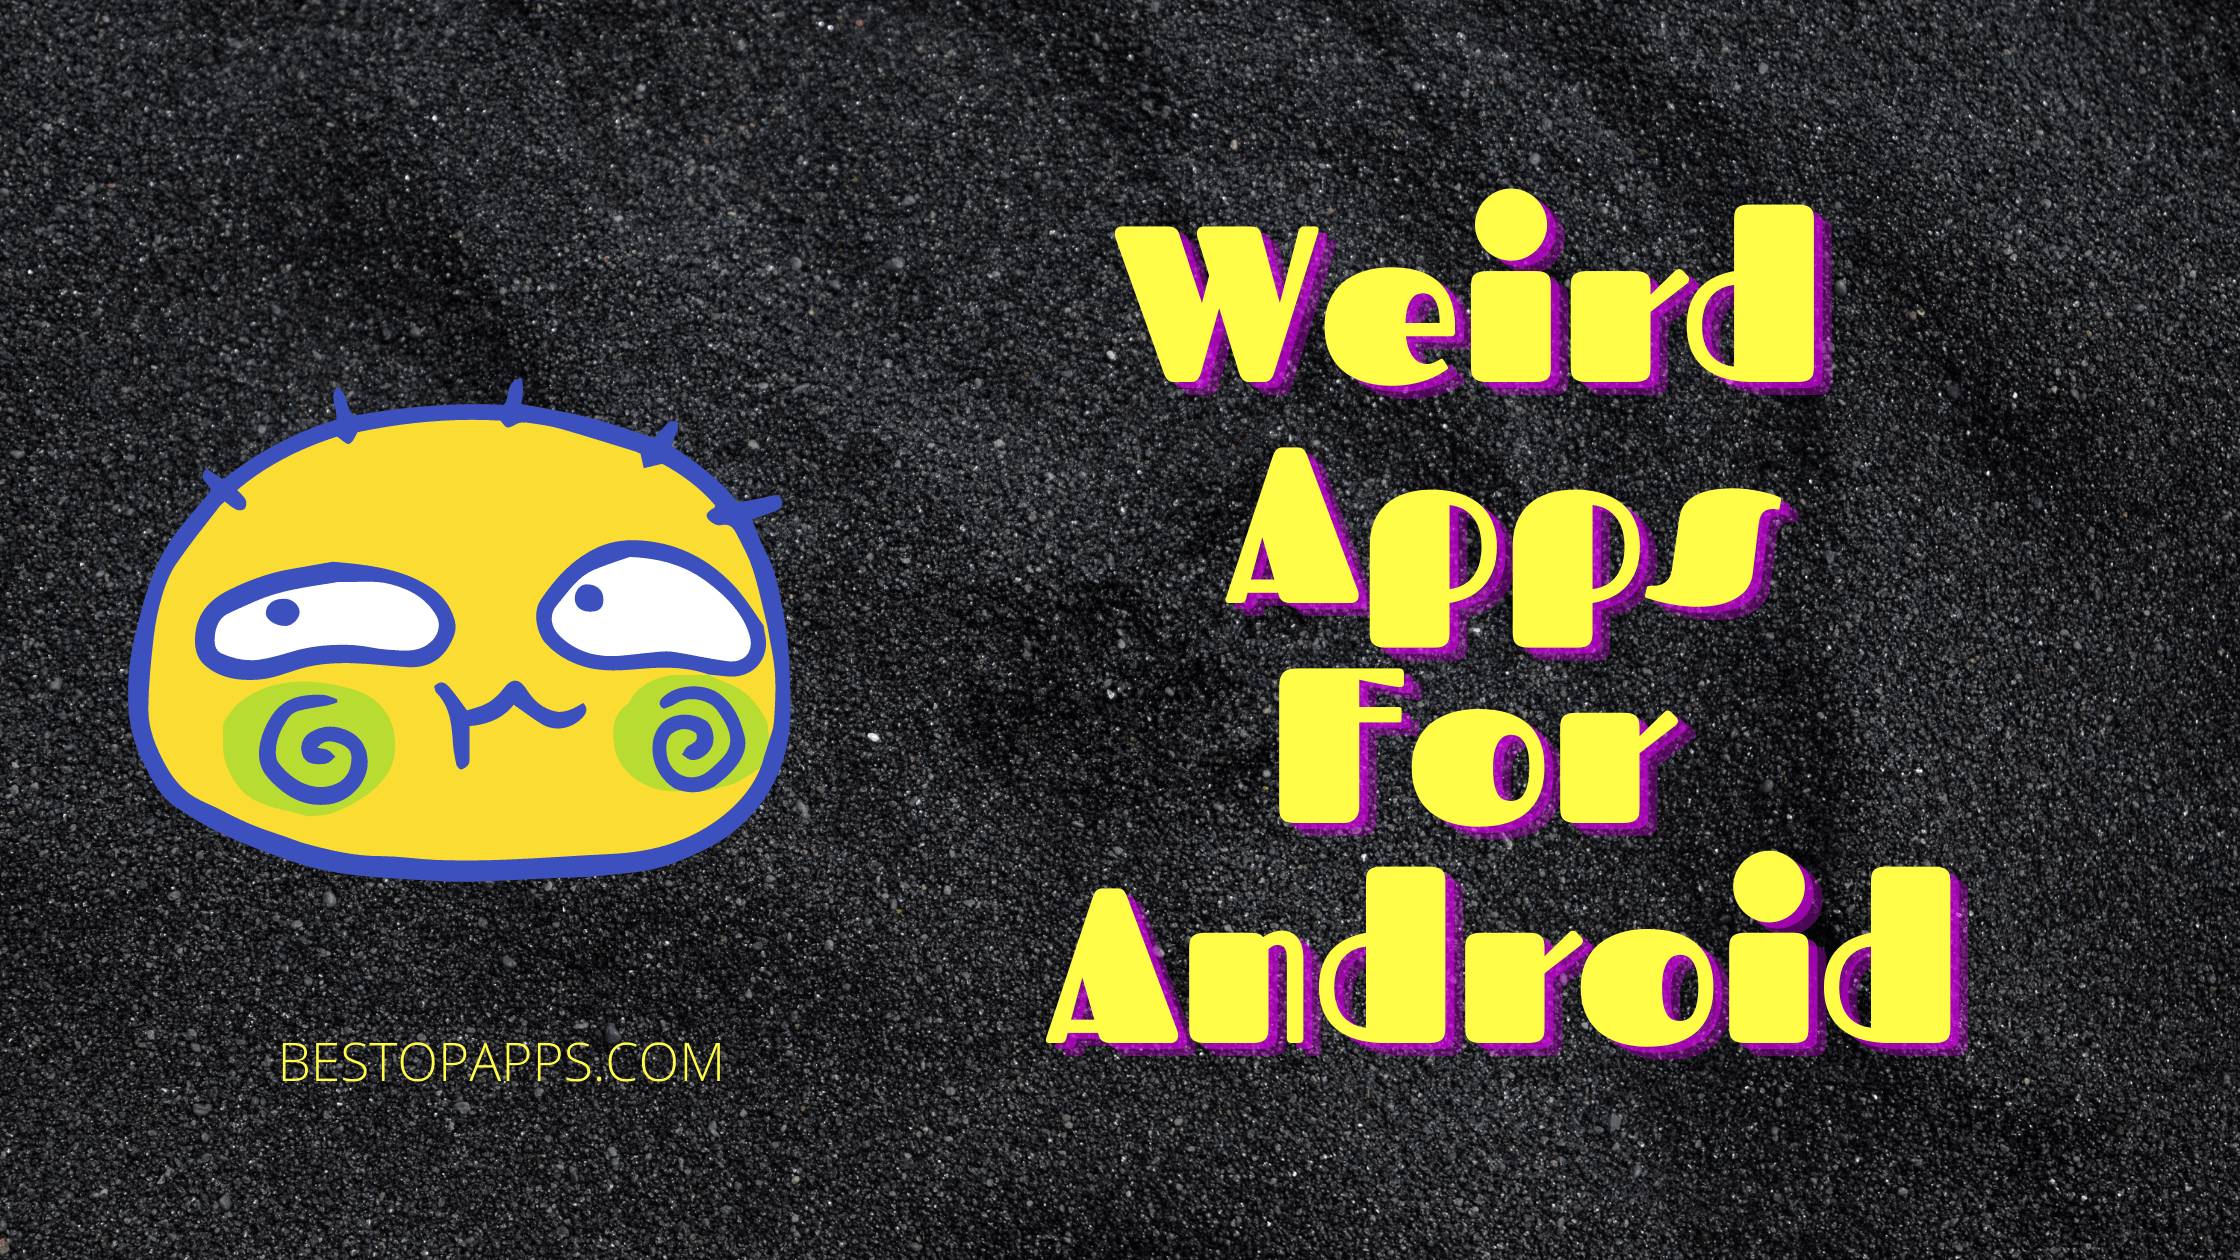 Weird Apps For Android